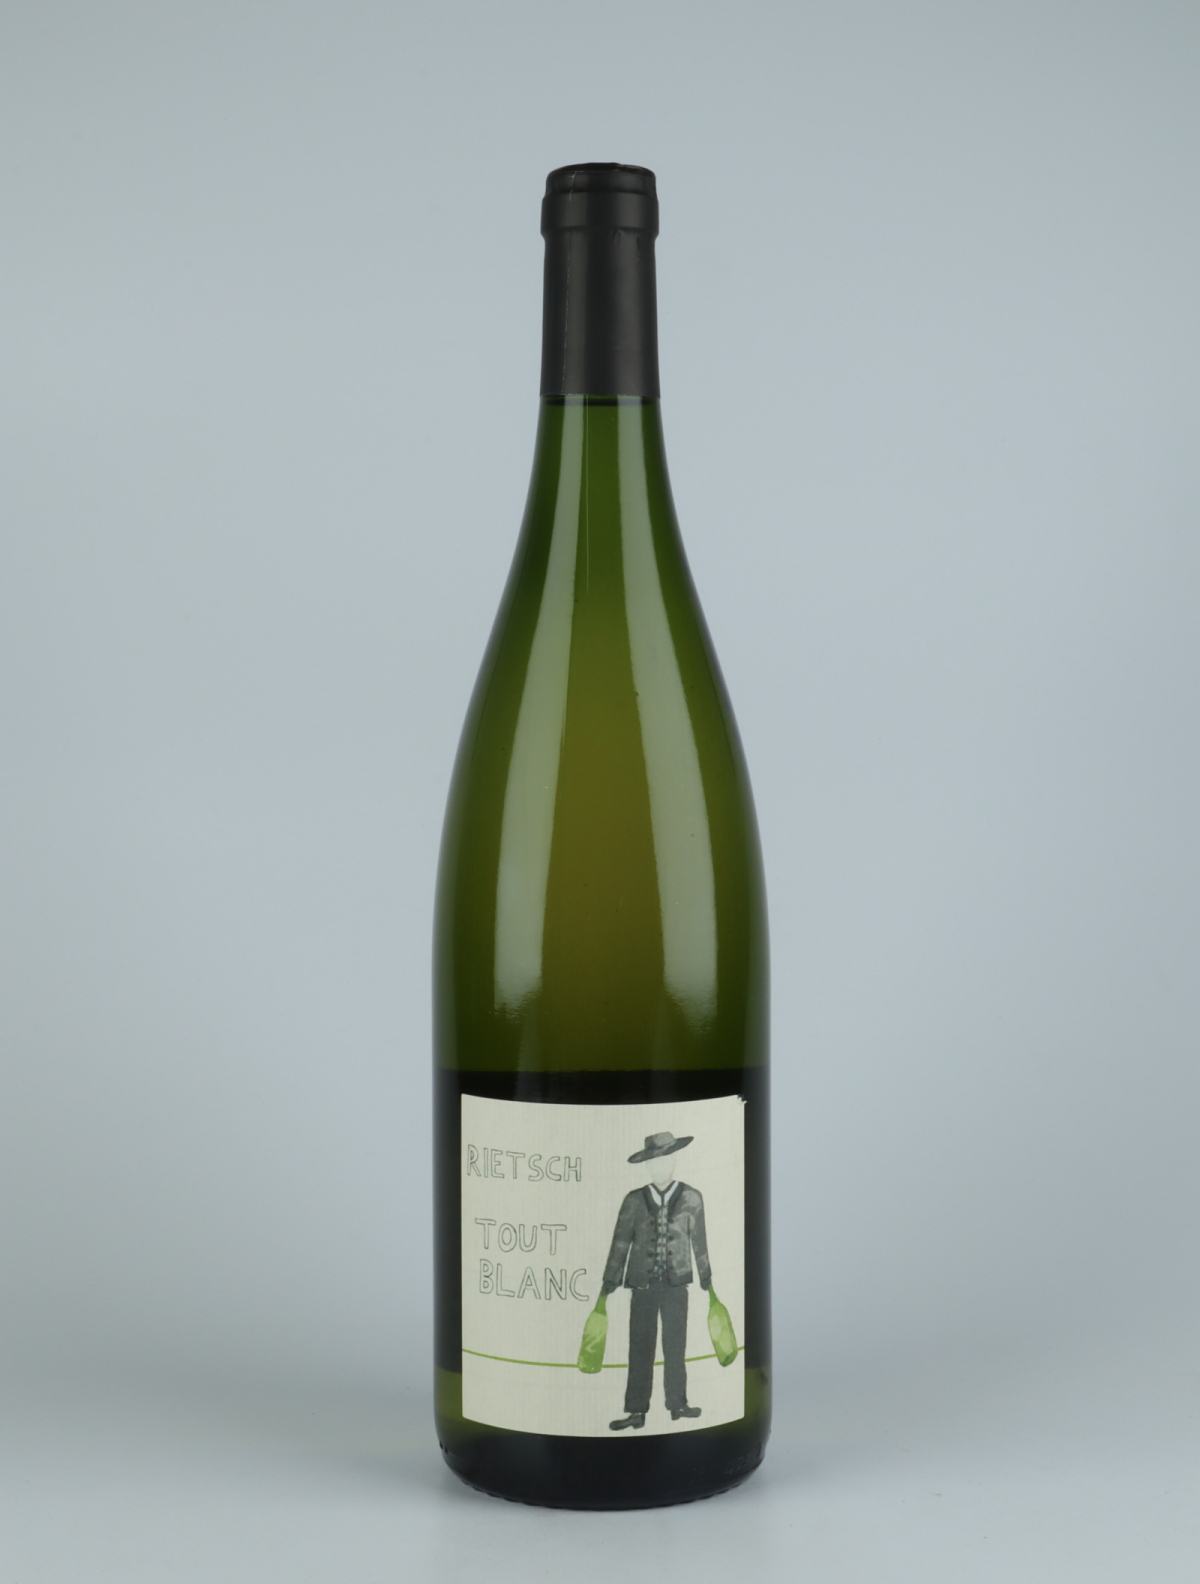 A bottle  Blanc au Litre White wine from Domaine Rietsch, Alsace in France